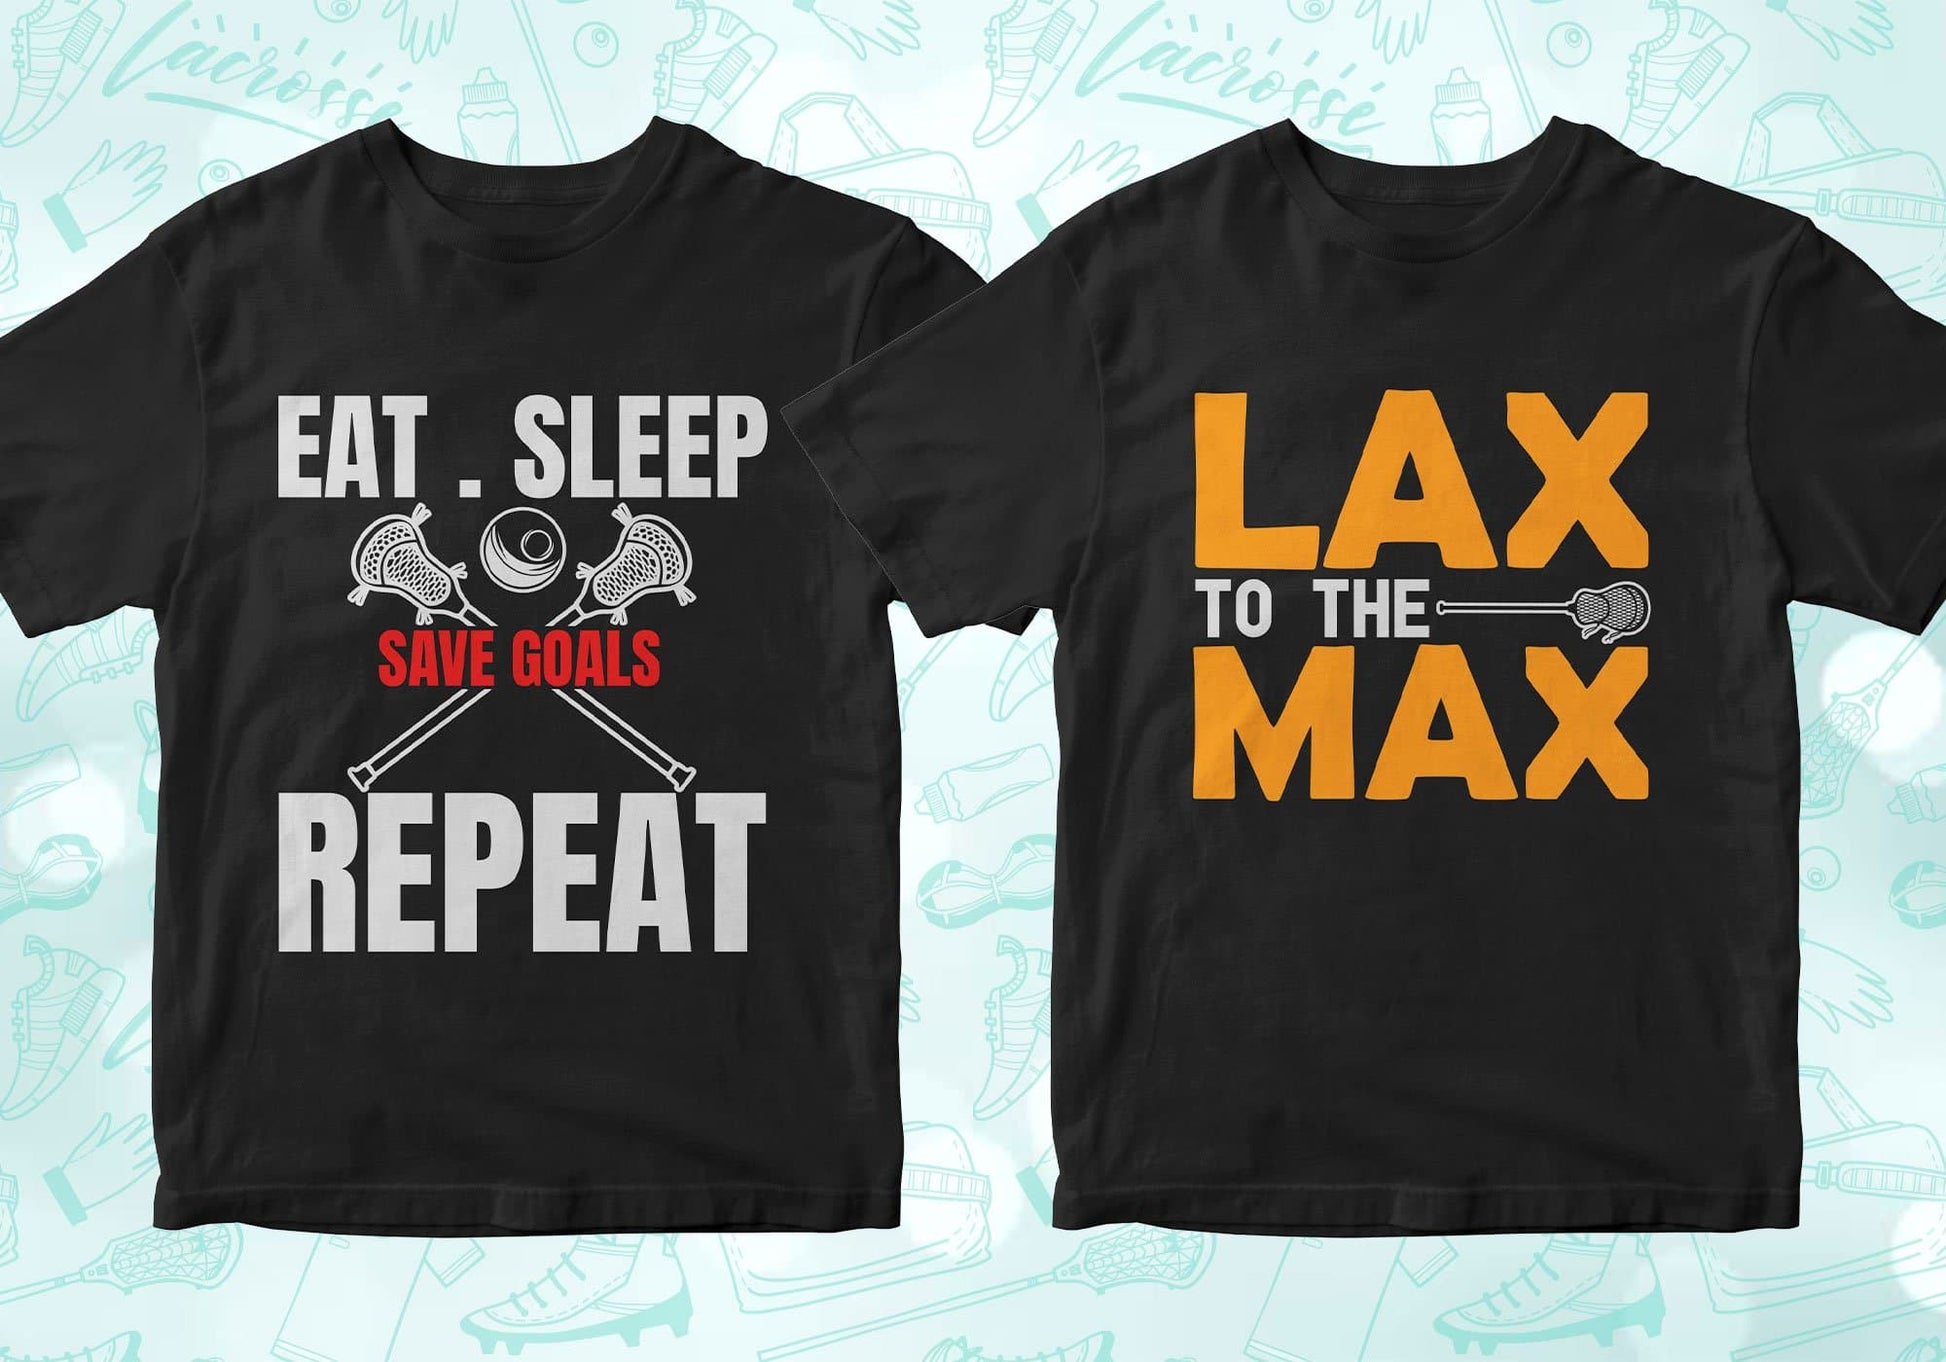 eat sleep save goals repeat, lax to the max, lacrosse shirts lacrosse tshirt lacrosse t shirts lacrosse shirt designs lacrosse graphic